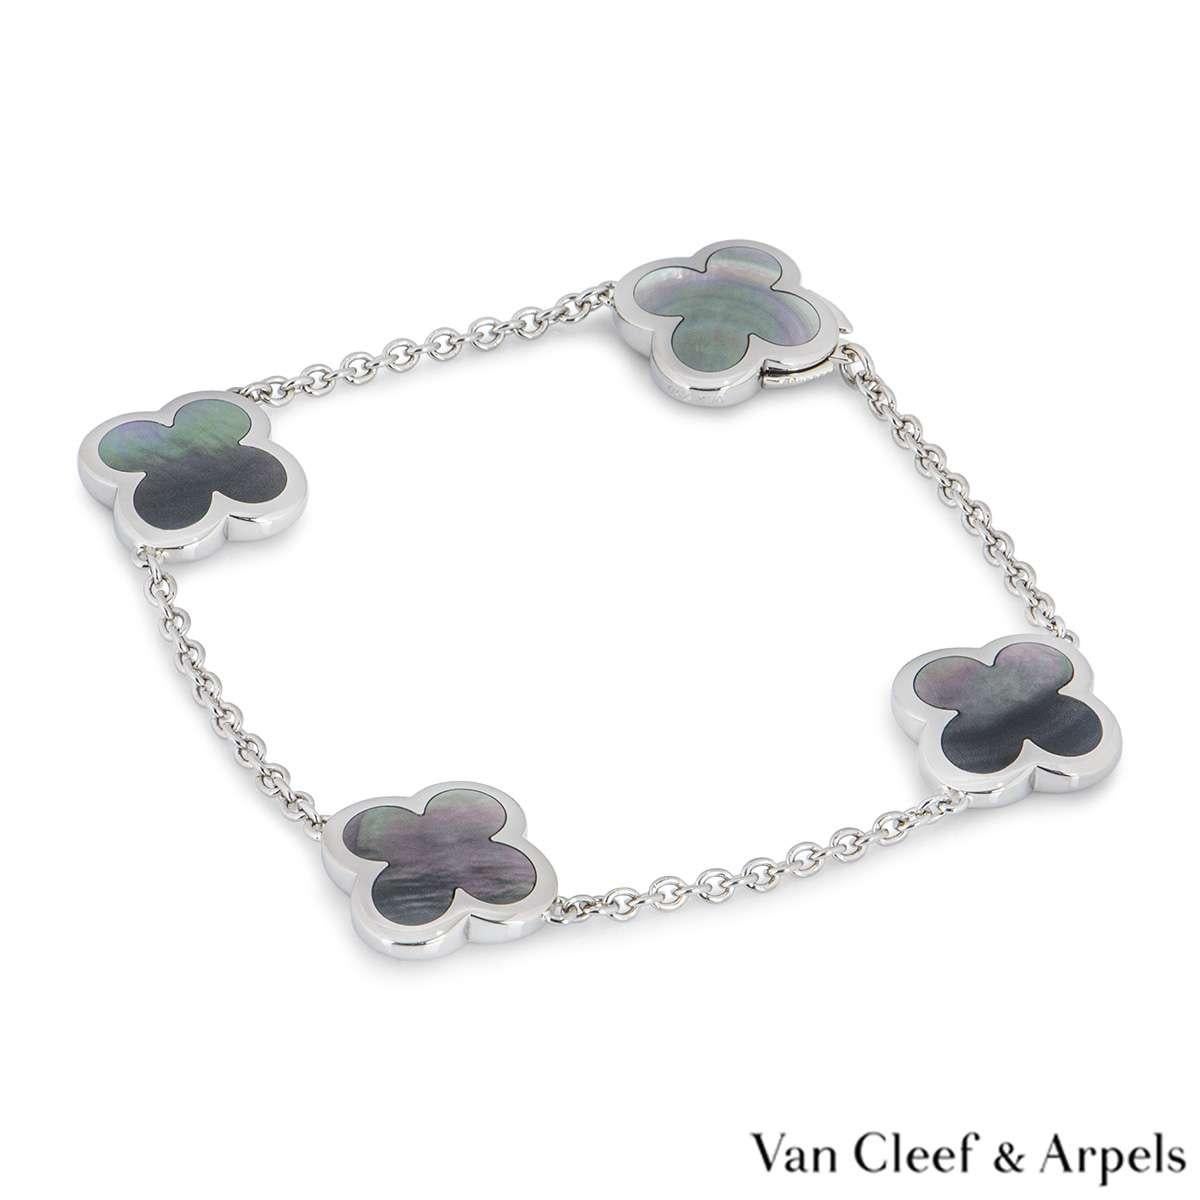 An 18k white gold Pure Alhambra bracelet by Van Cleef & Arpels. The bracelet is composed of 4 iconic four leaf clover motifs, set to the centre with grey mother of pearl inlays and a polished outer edge. The bracelet measures 7 inches in length and